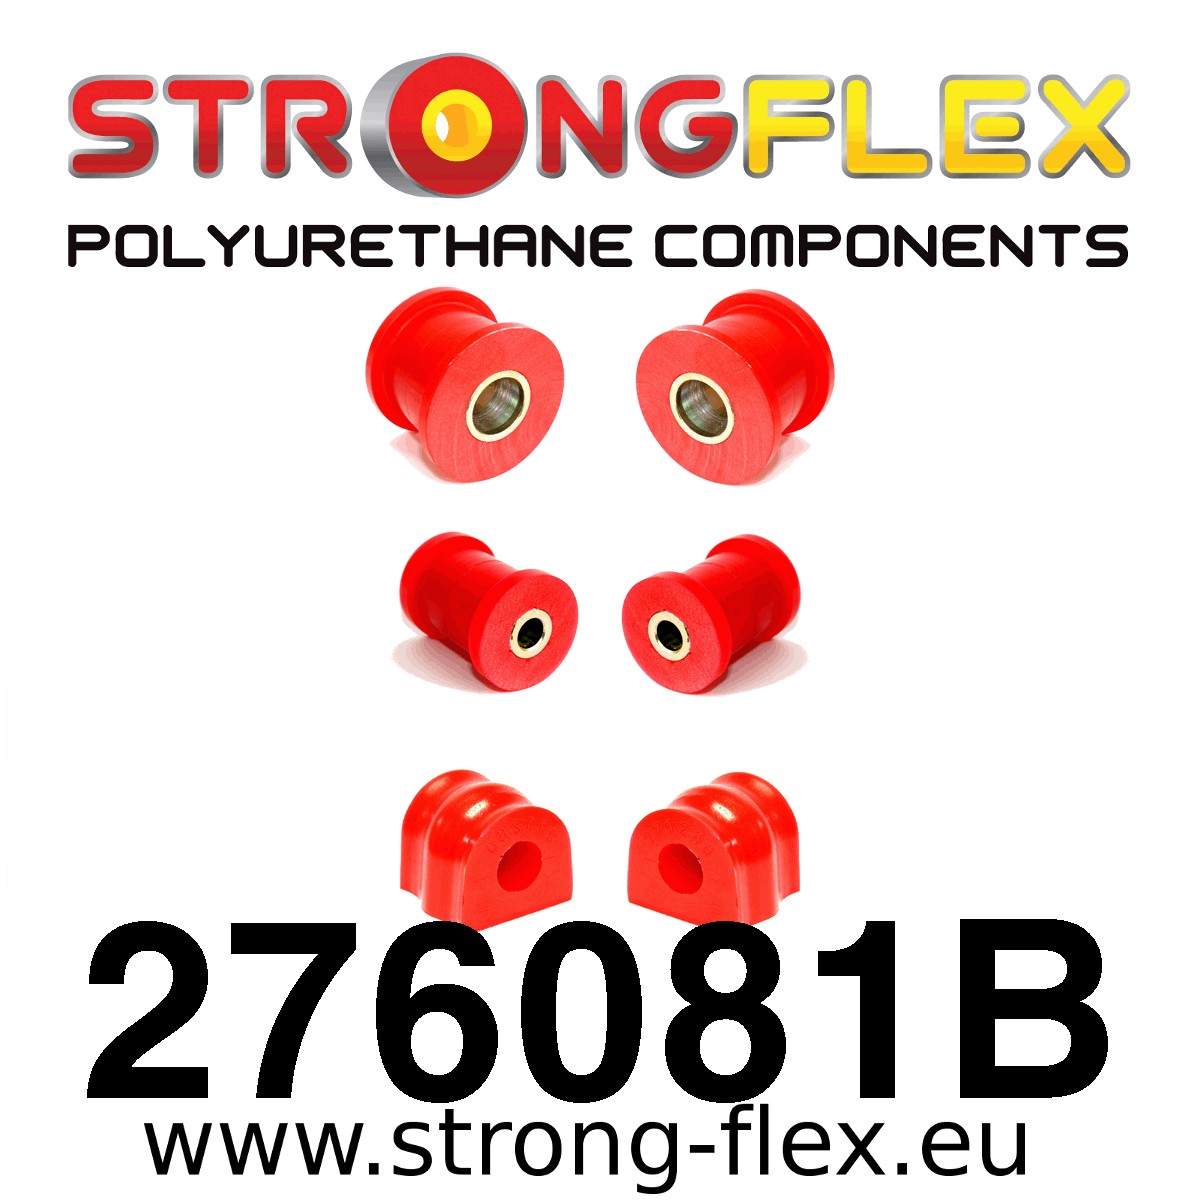 images/productimages/small/Strongflex-1996.jpg